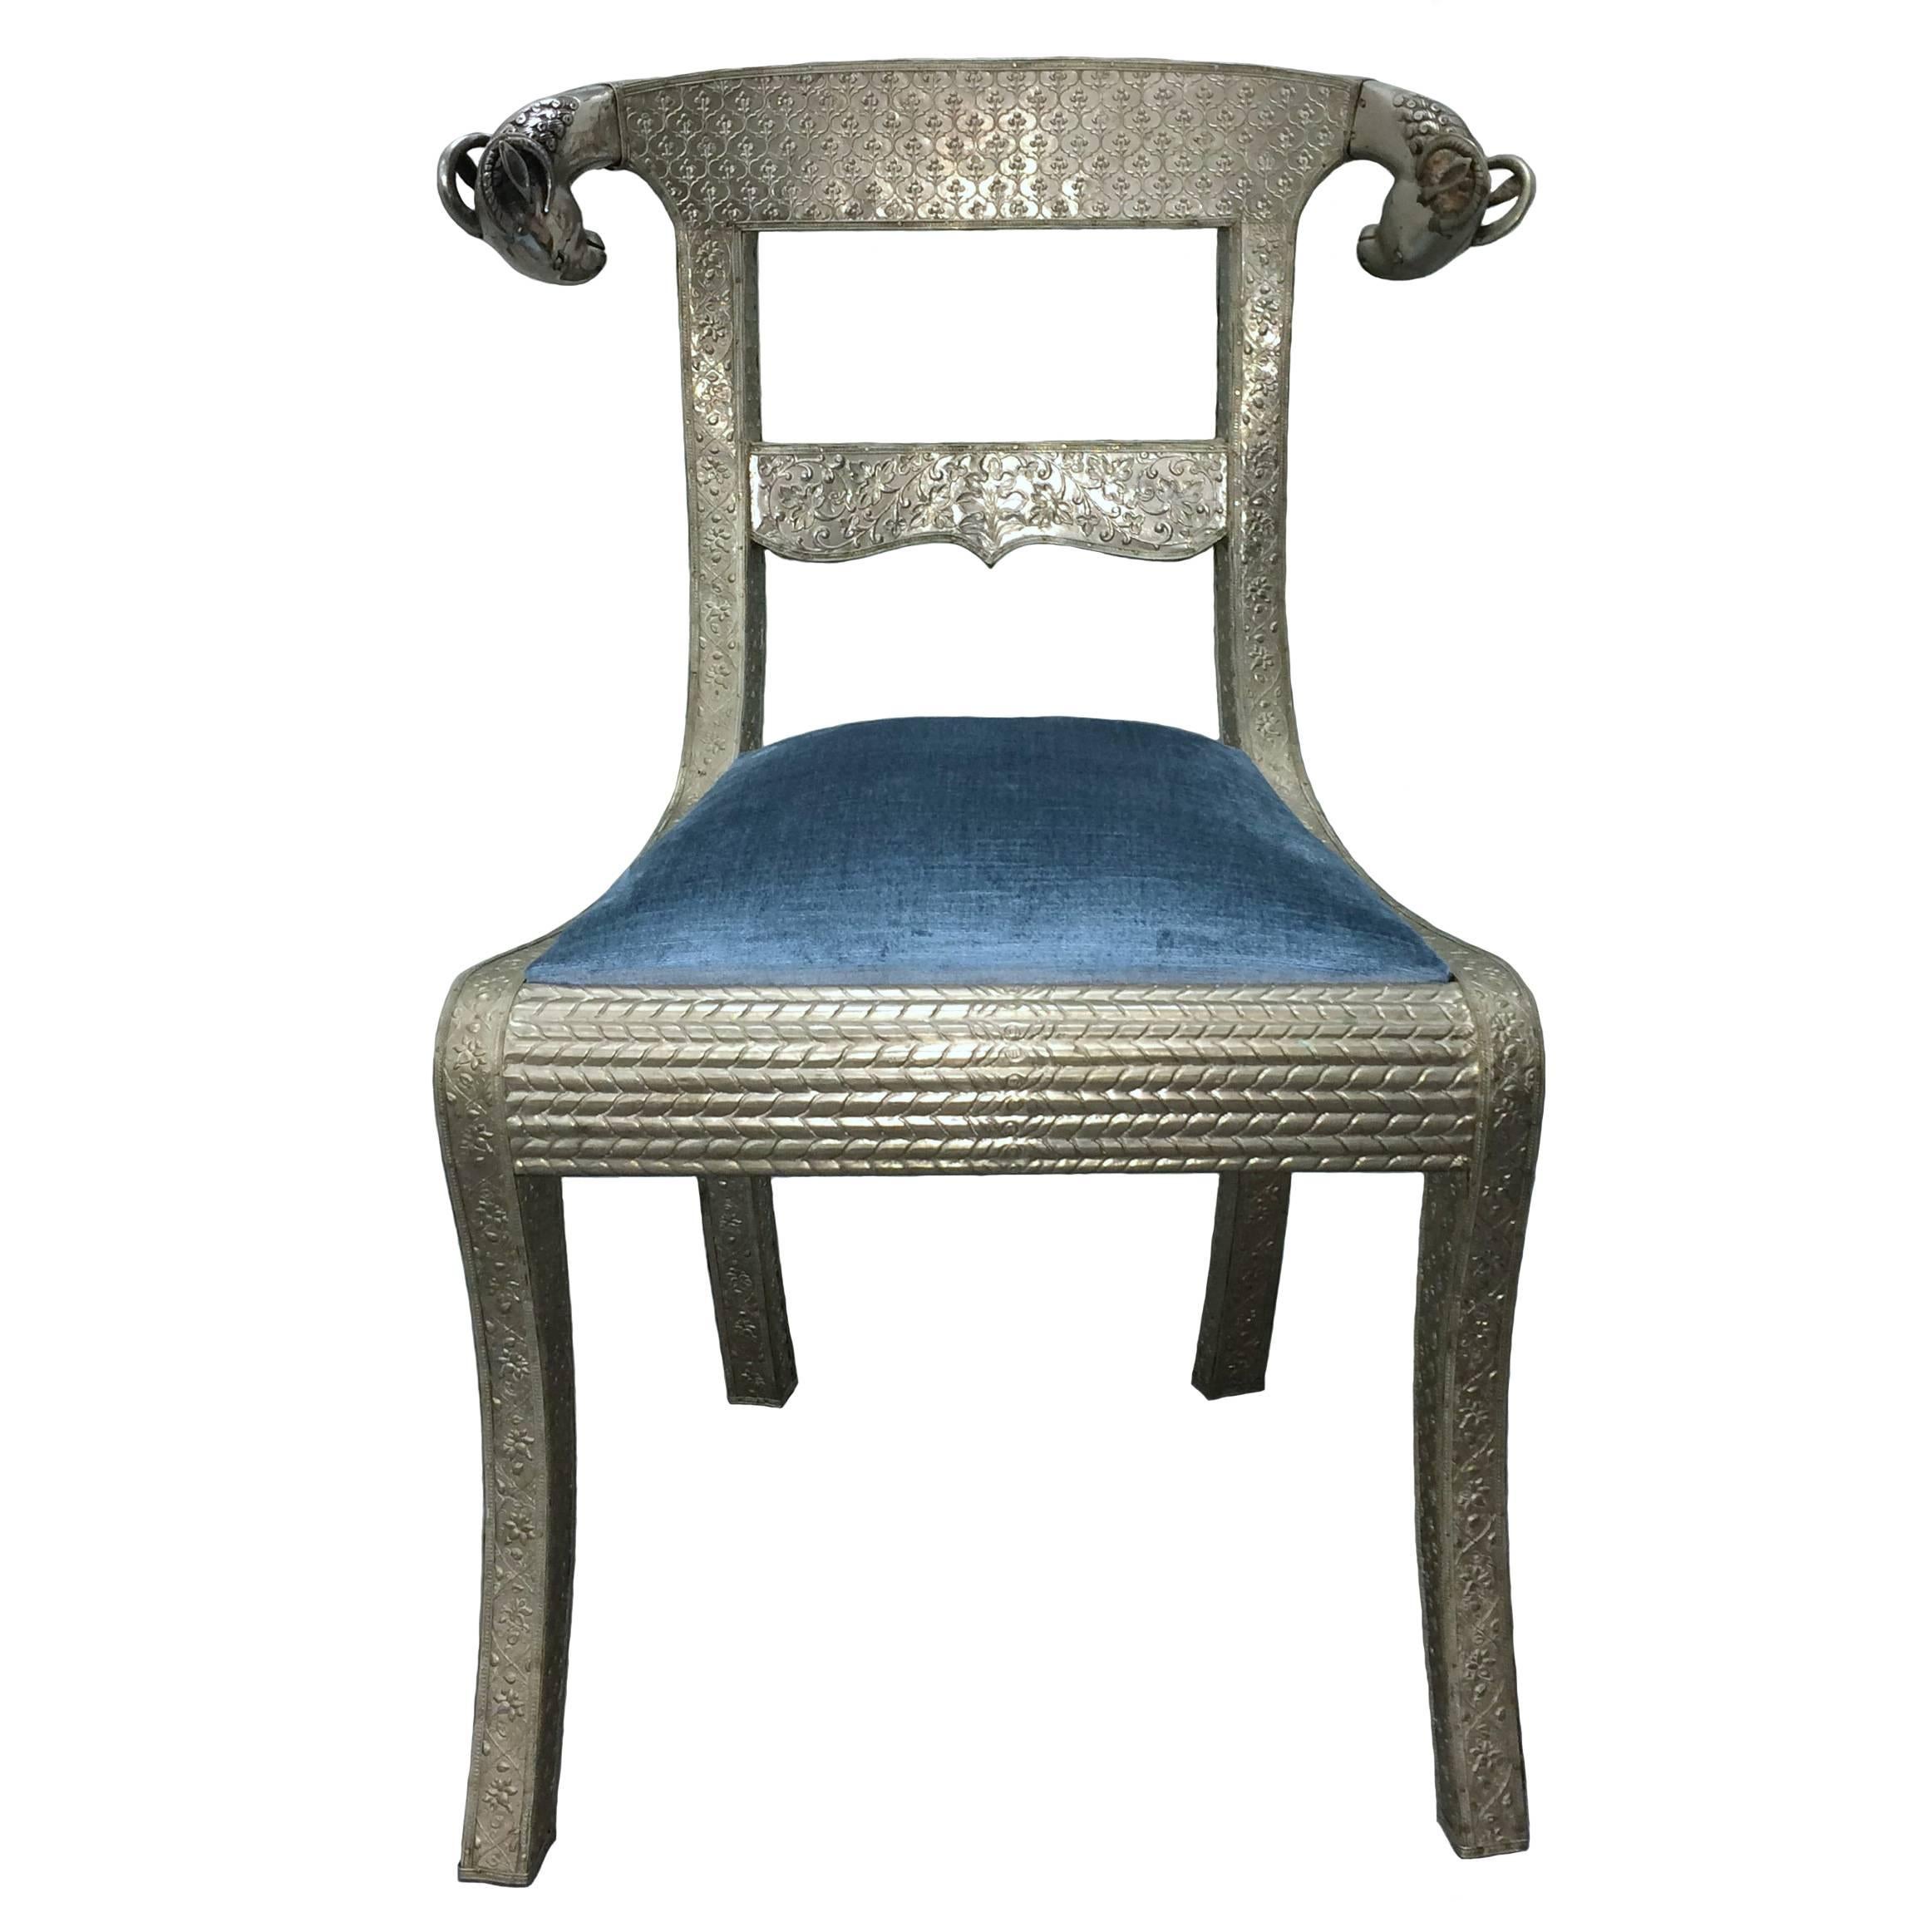 Indian Repoussé Ram's Head Side Chair